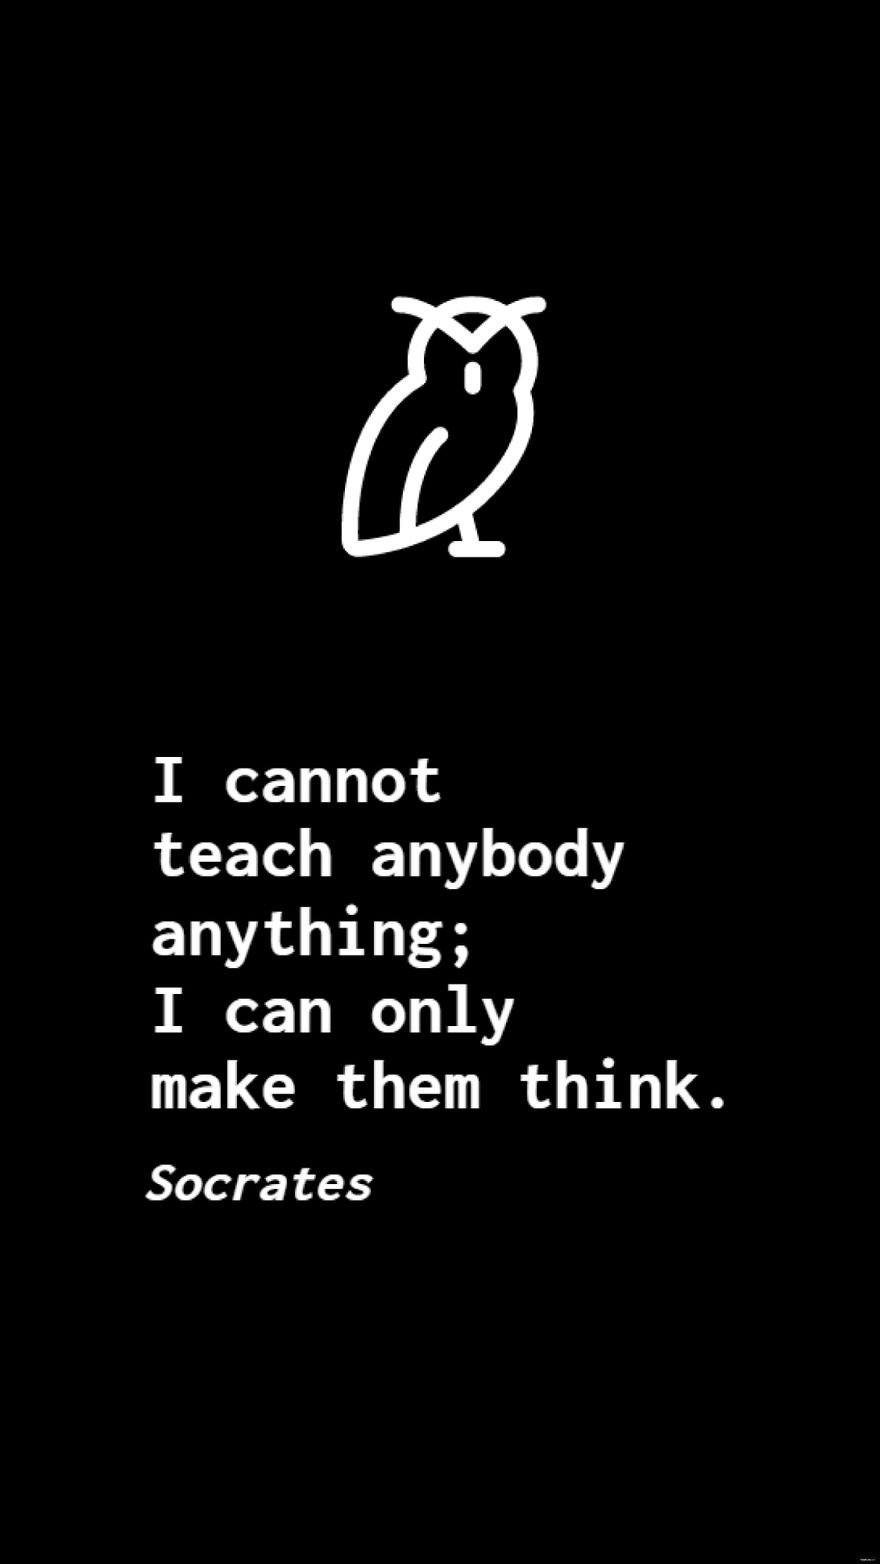 Socrates - I cannot teach anybody anything; I can only make them think. in JPG